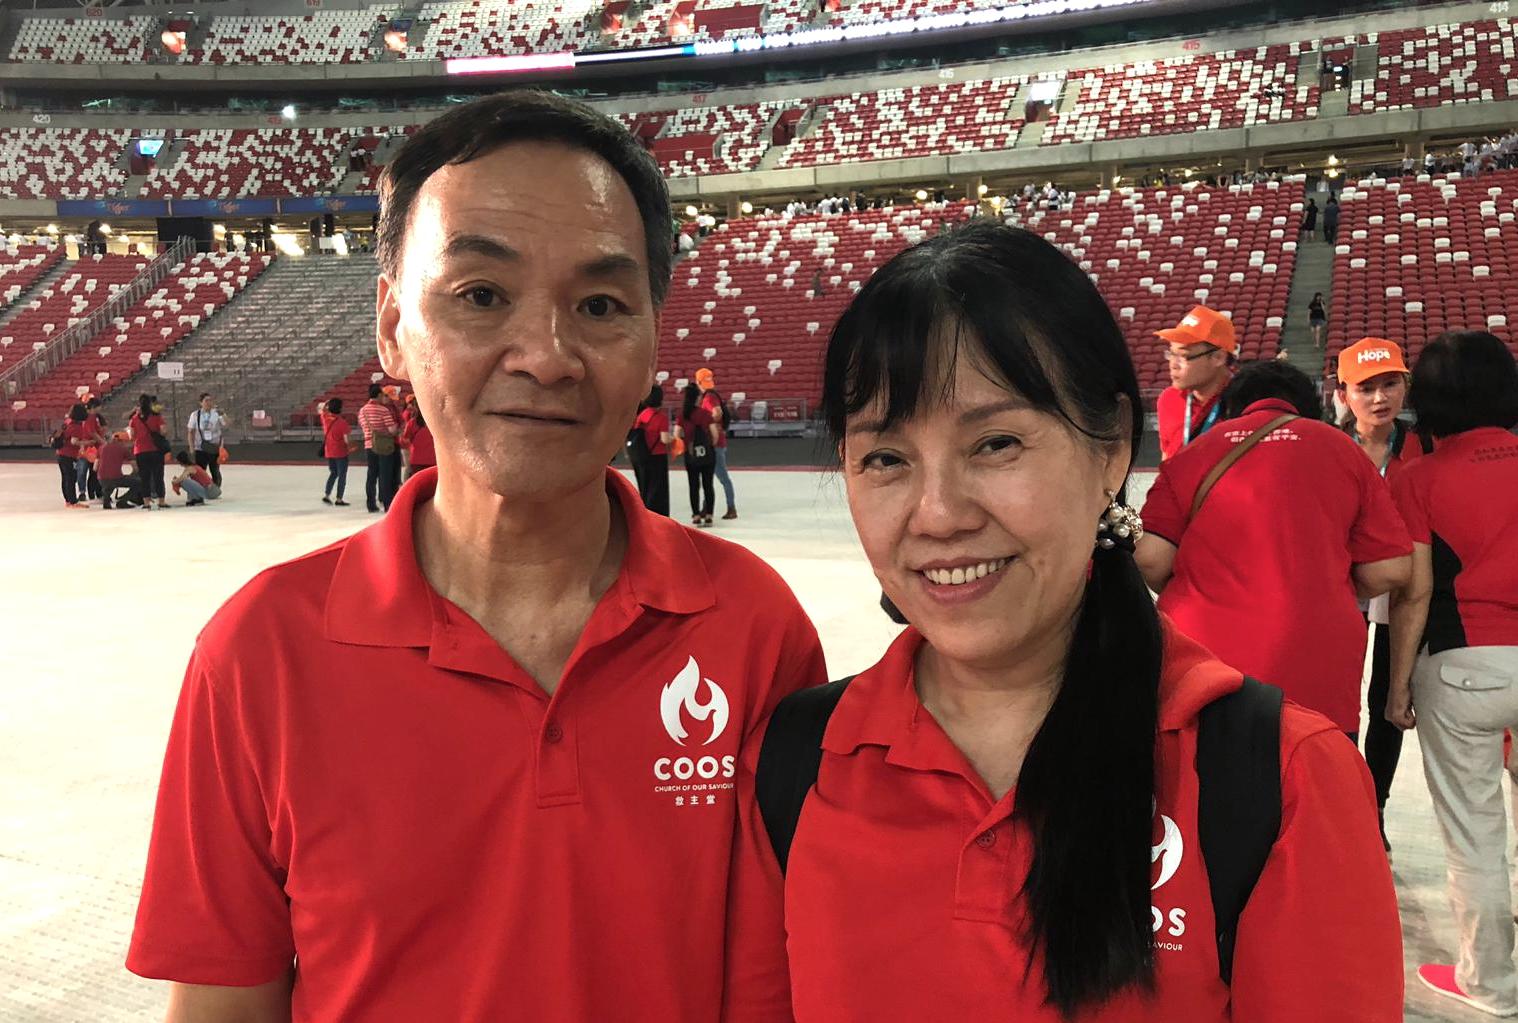 COH Chinese Eyleen Chin and her husband, Cheong Seng, took a bold step of faith to invite their friends and all three decided to receive Christ. Photo by Geraldine Tan.